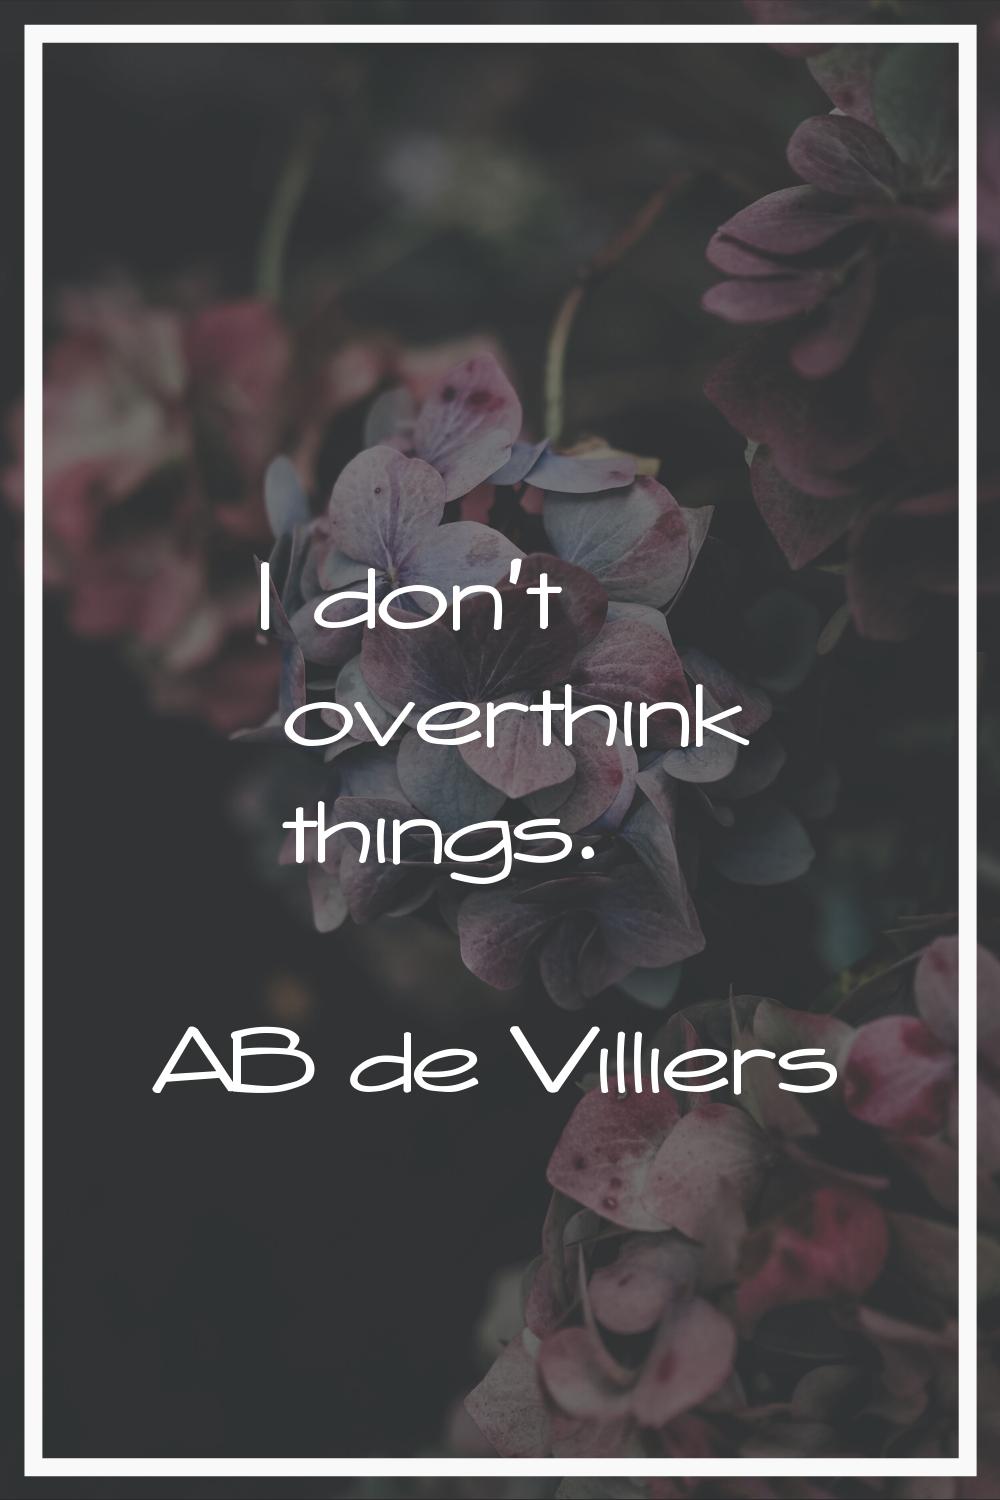 I don't overthink things.